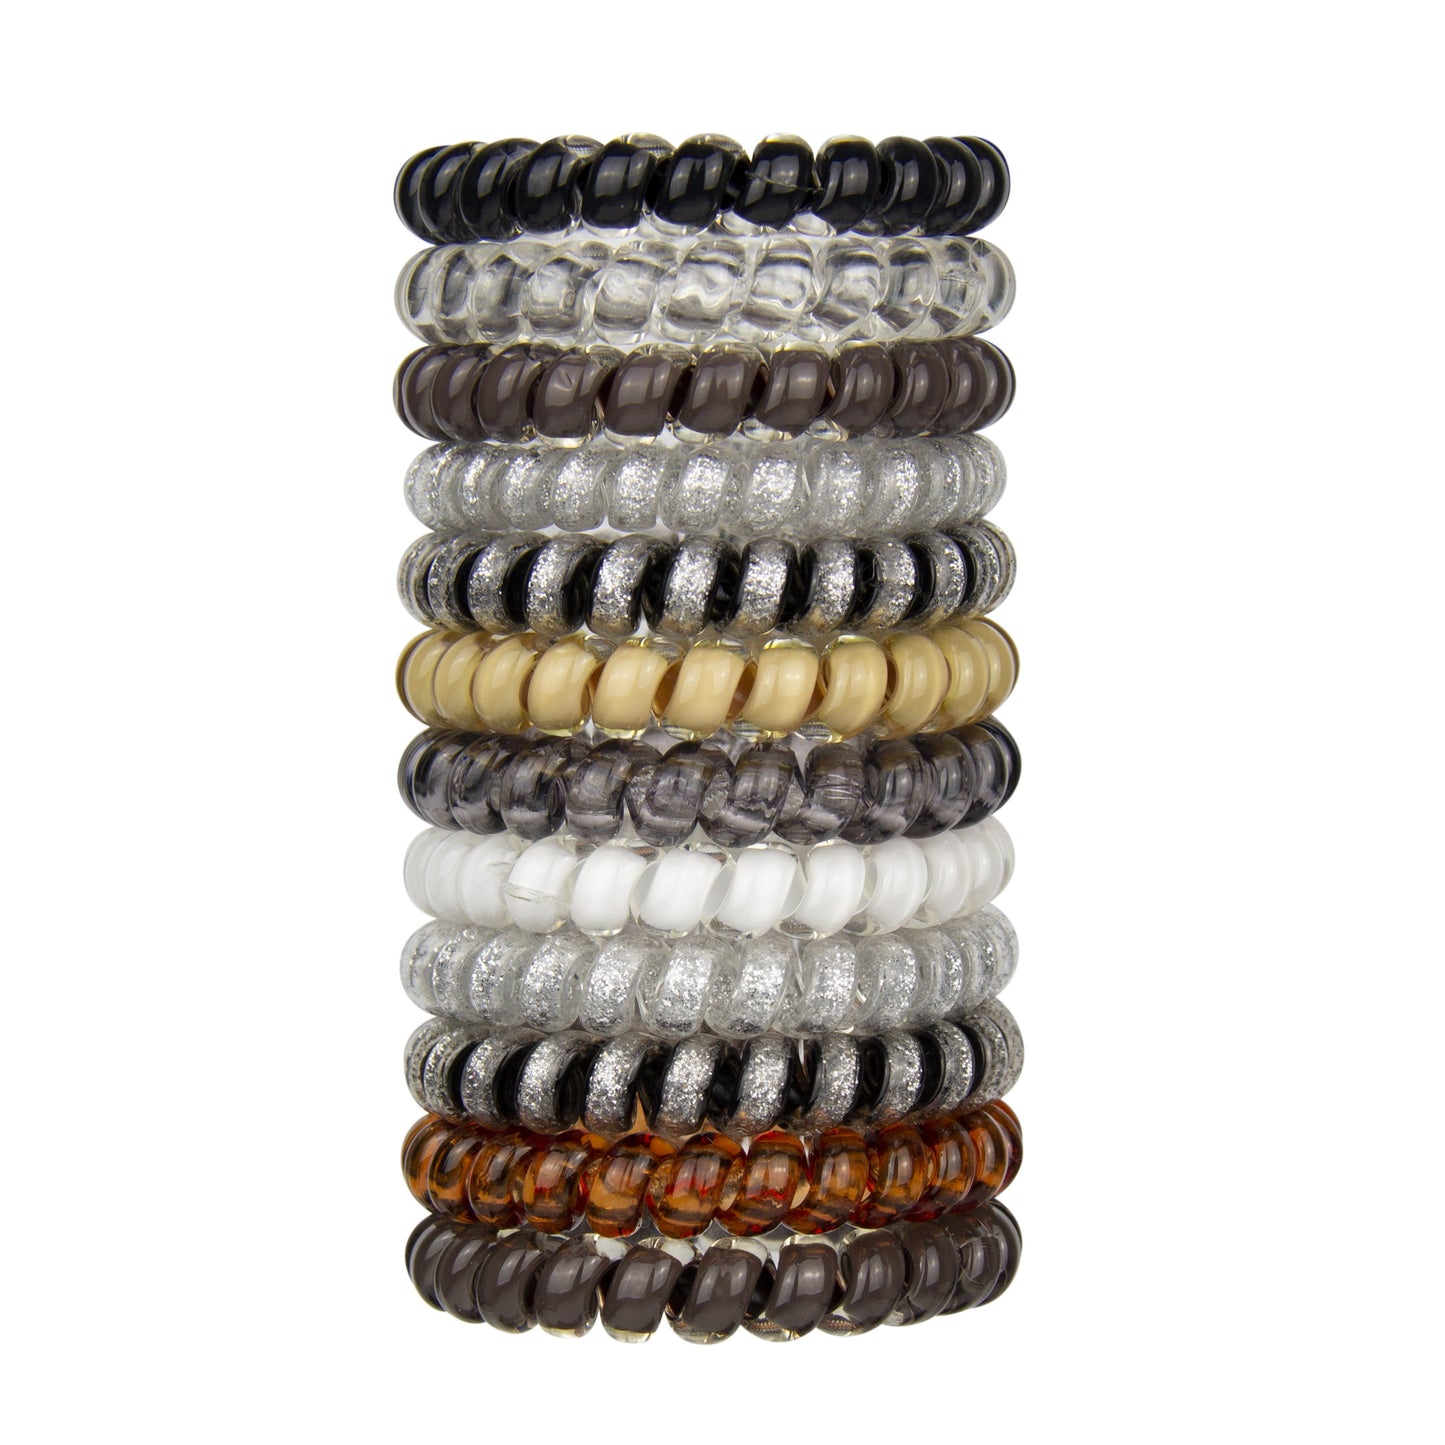 a stack of neutral color small swirlydo hair ties on a white backgound